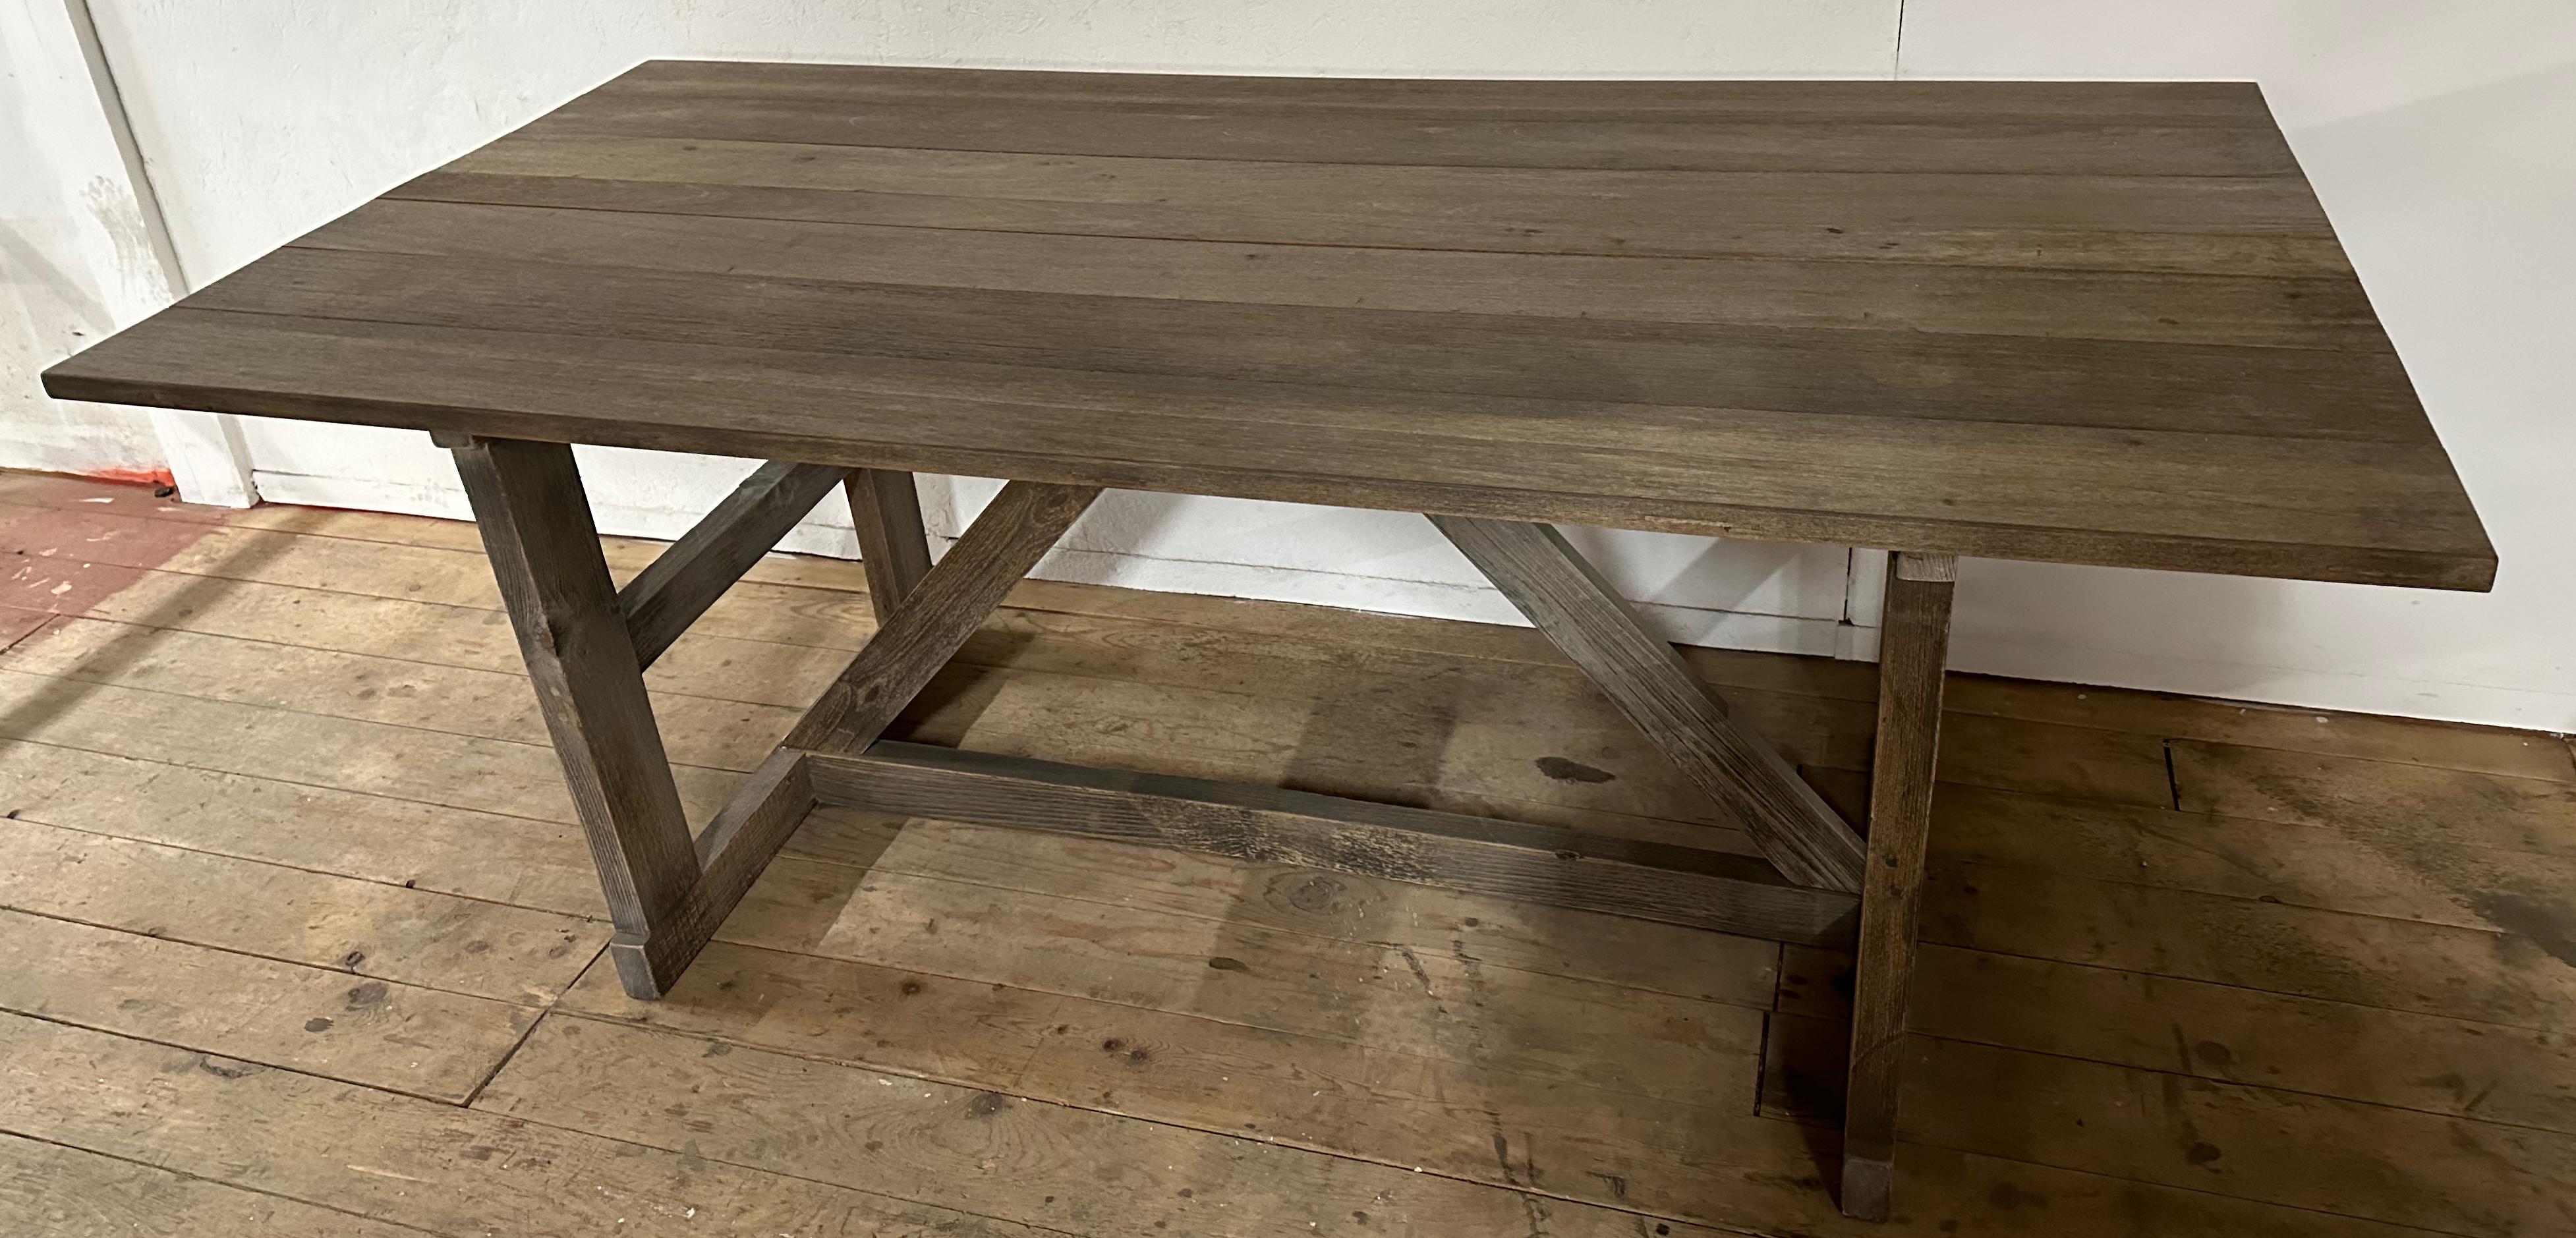 Wood Rustic Vintage Farm or Work Table For Sale